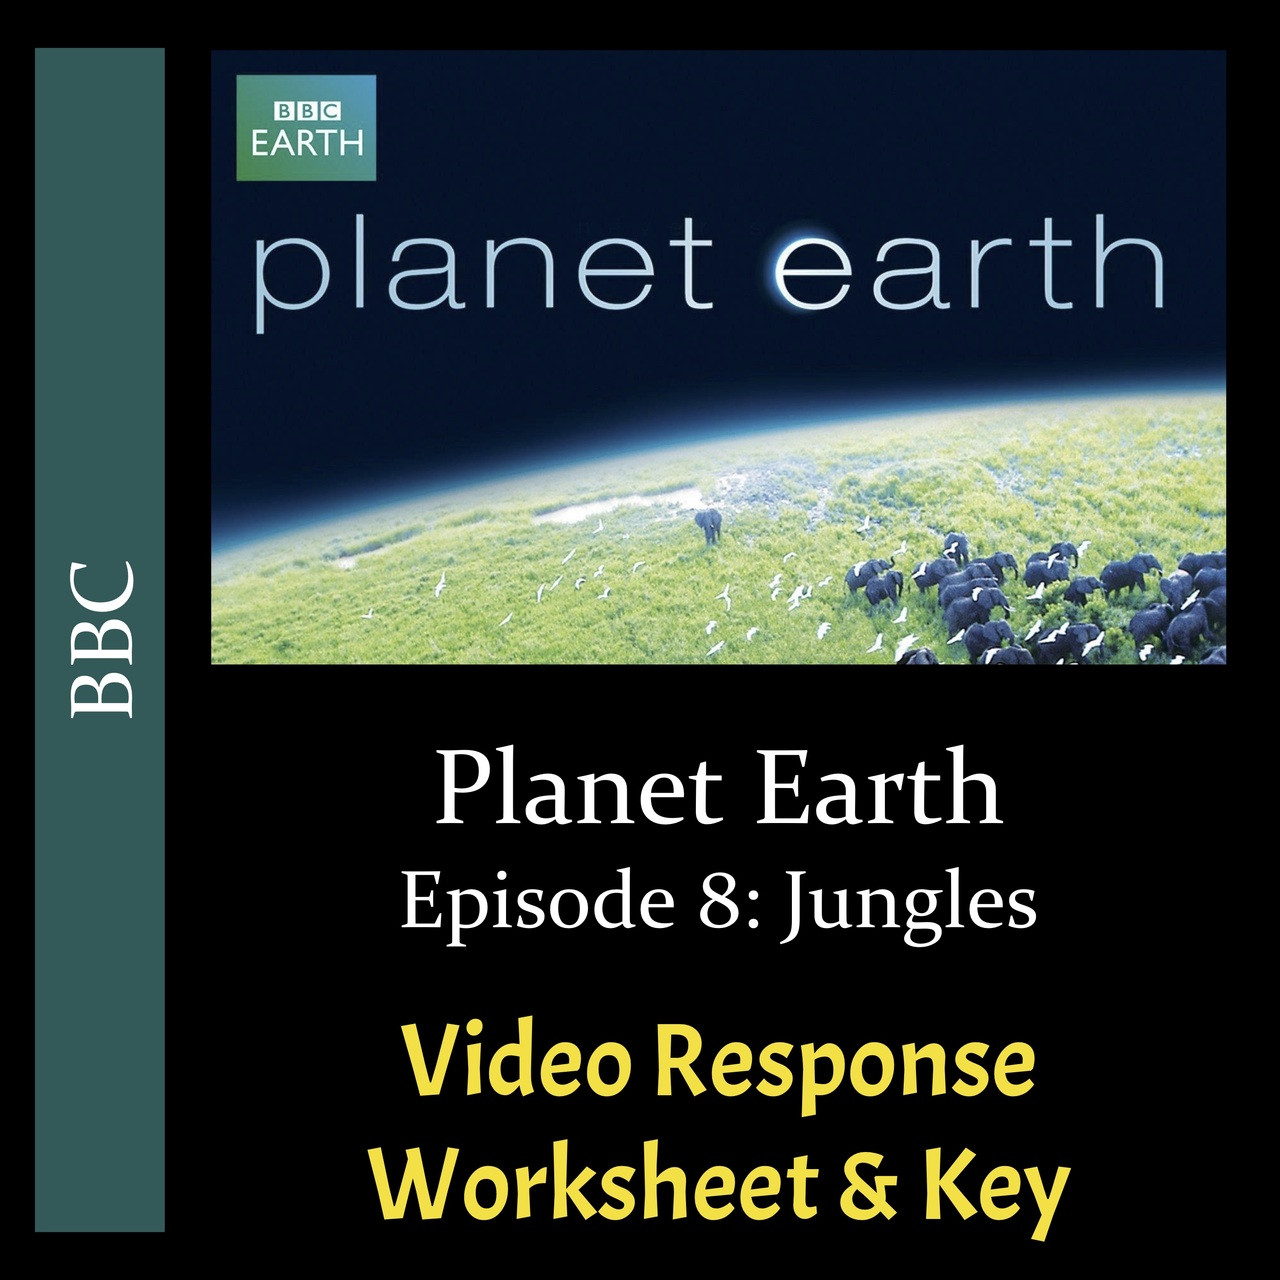 planet-earth-episode-08-jungles-video-response-worksheet-key-editable-amped-up-learning